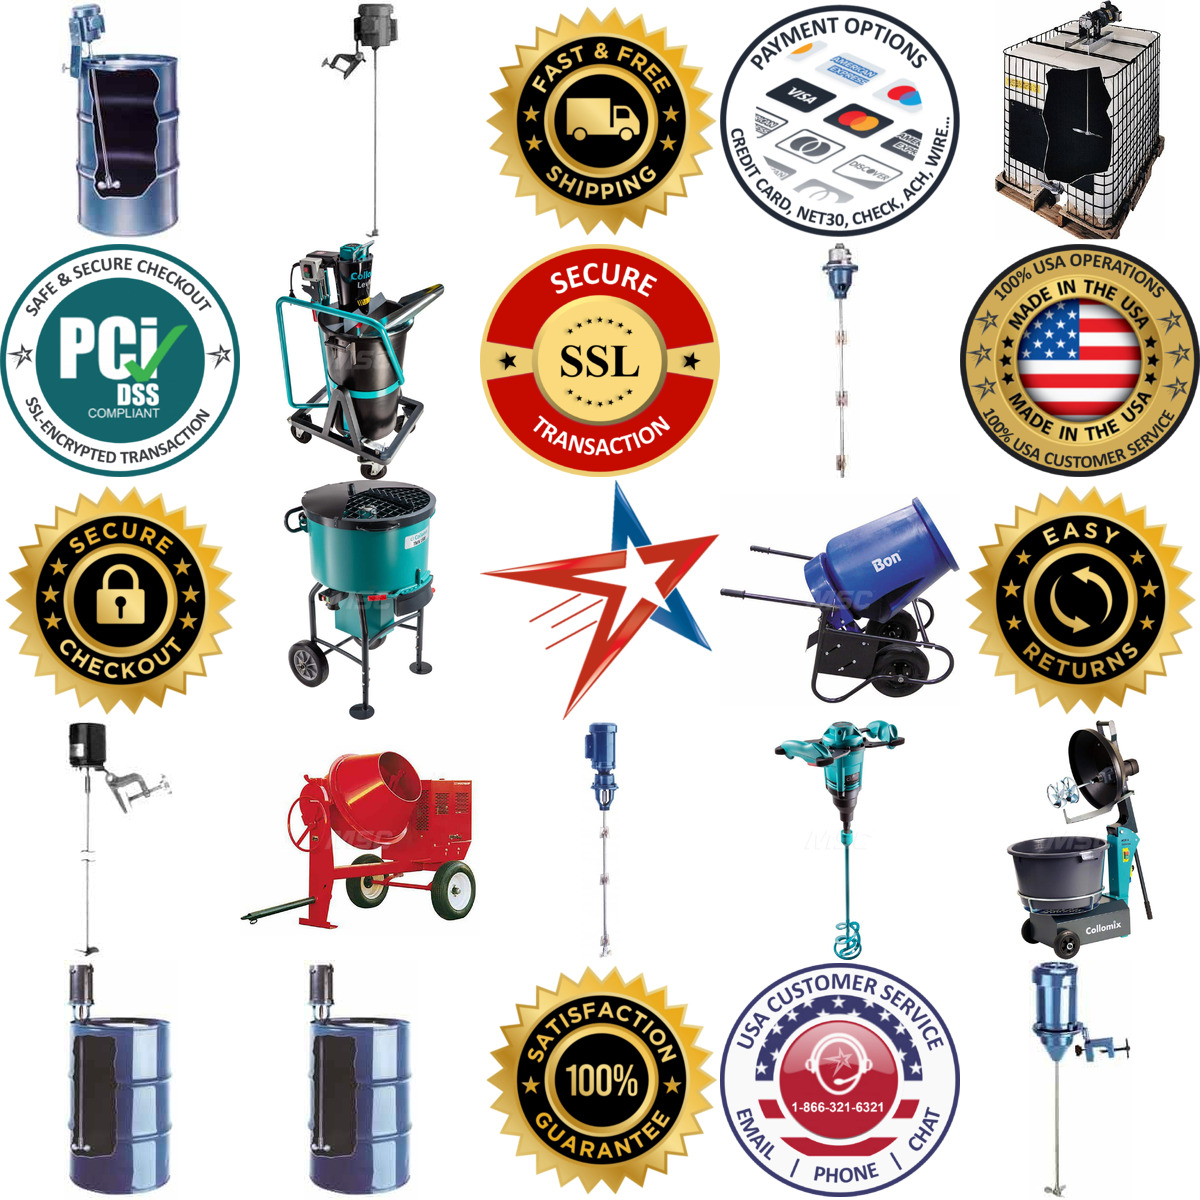 A selection of Electric Mixers products on GoVets